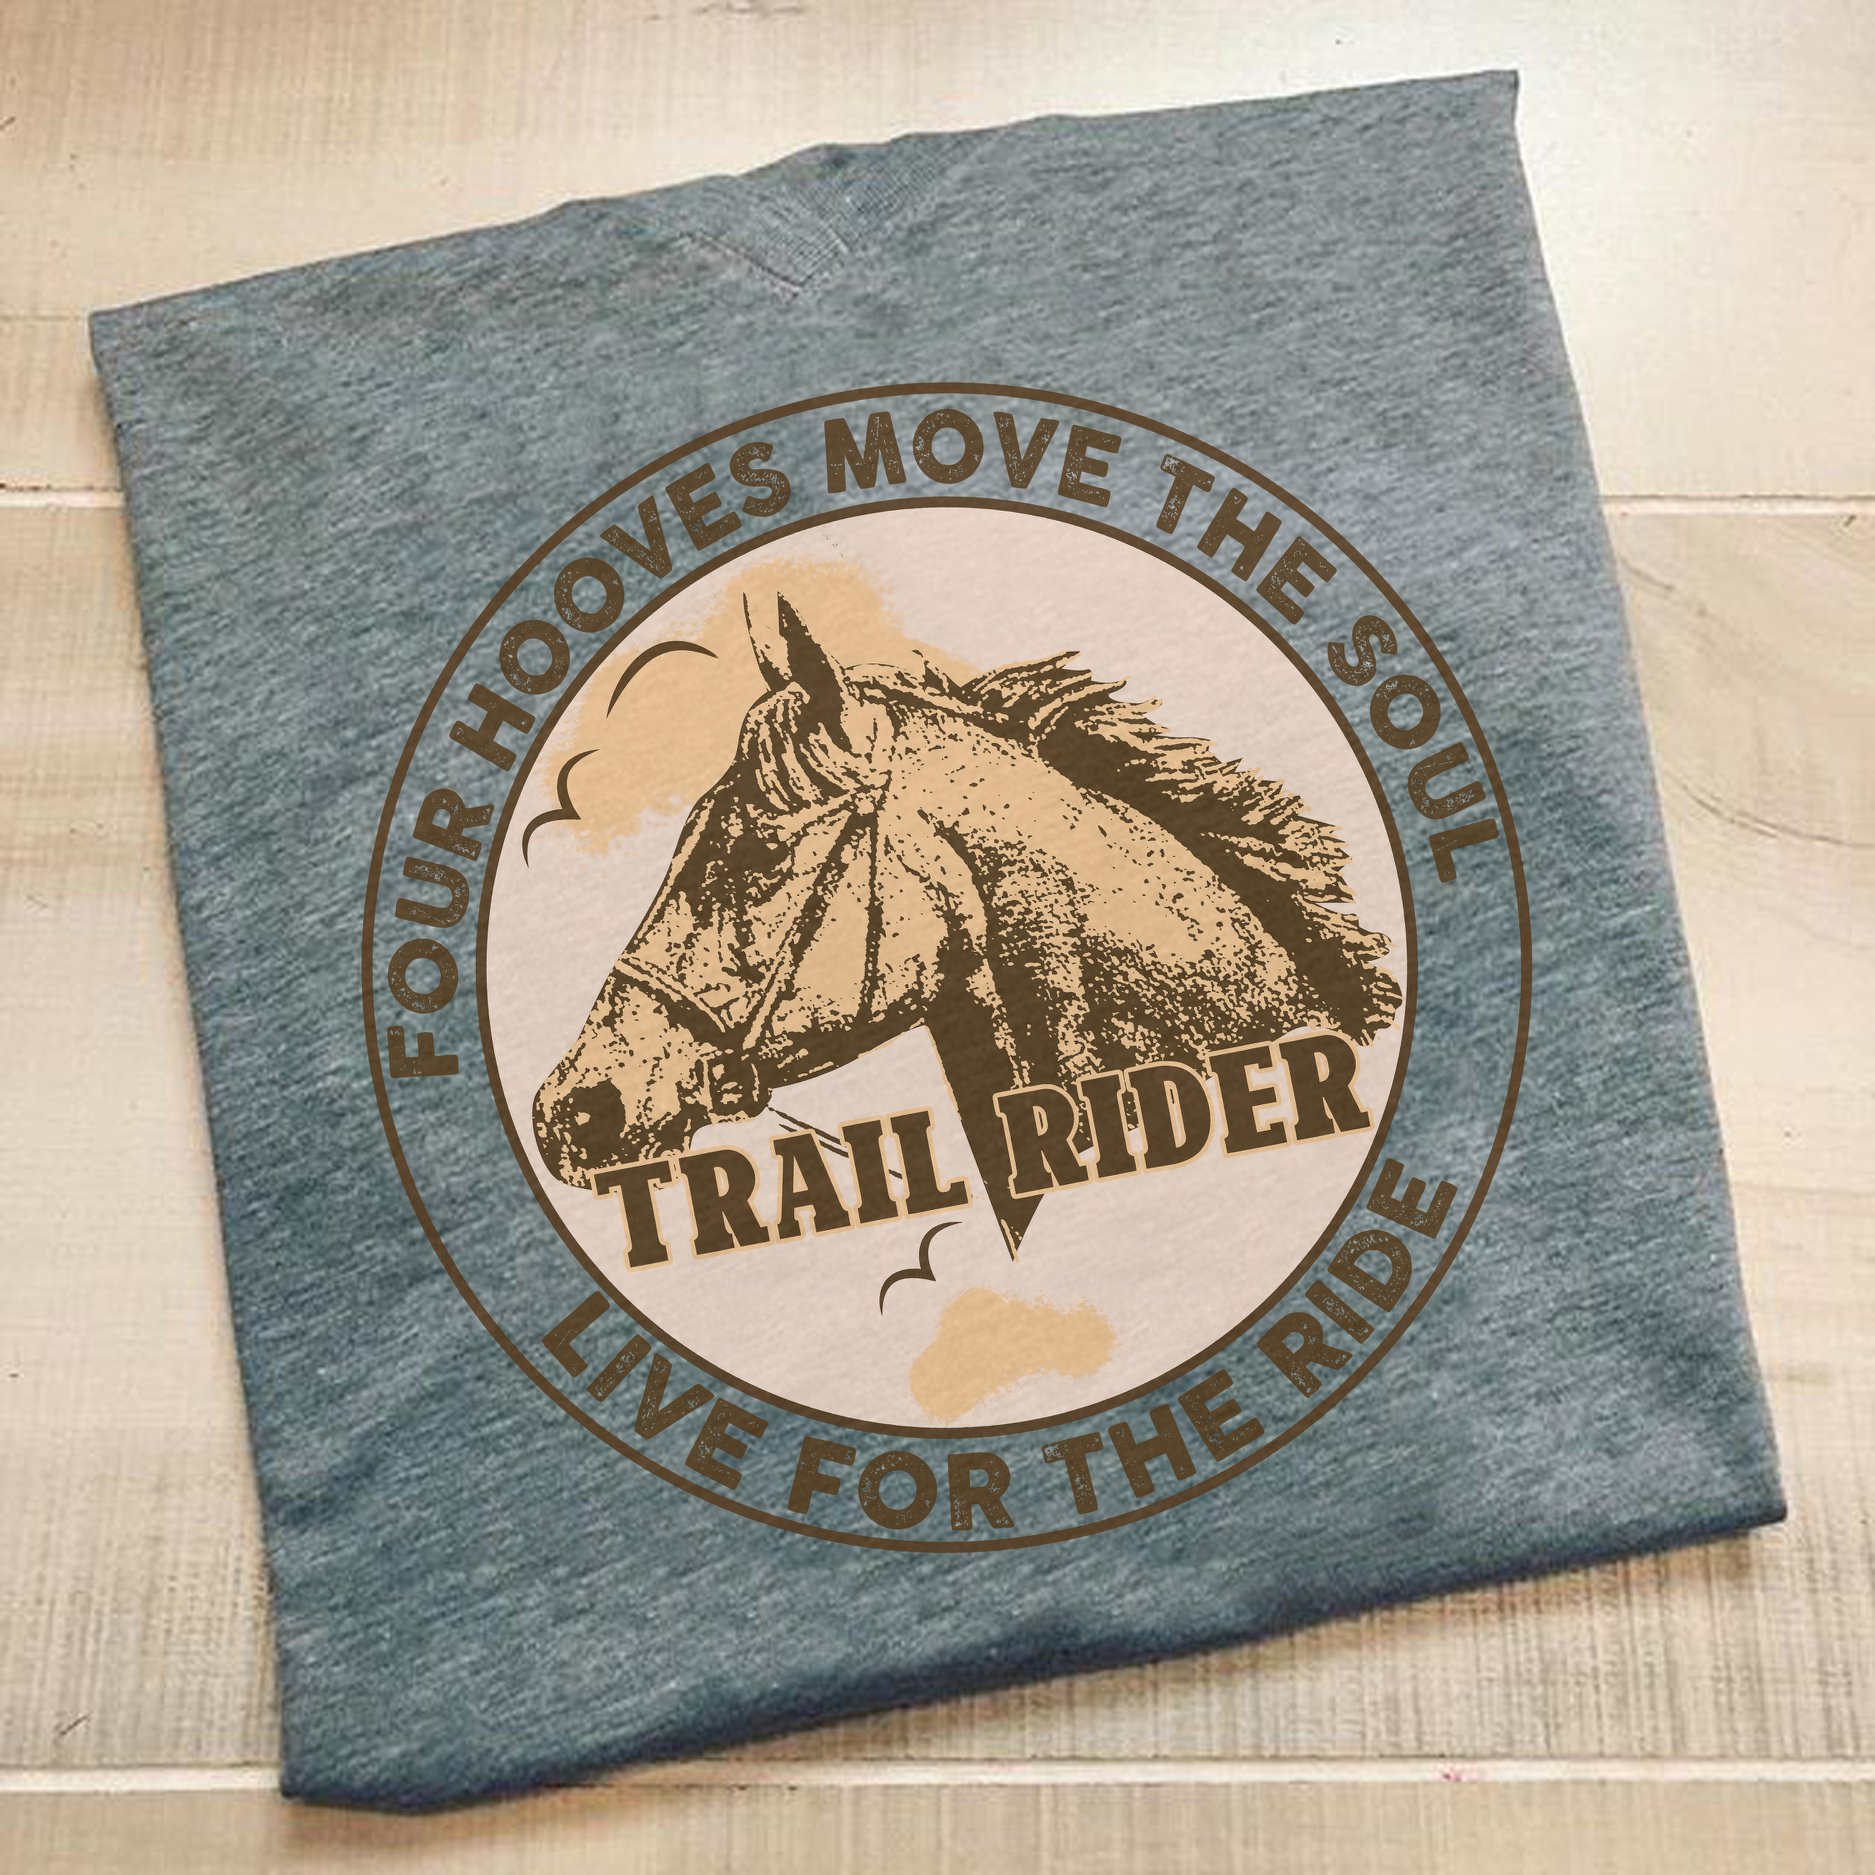 Four hooves move the soul live for the ride - Trail rider, horse riding lover